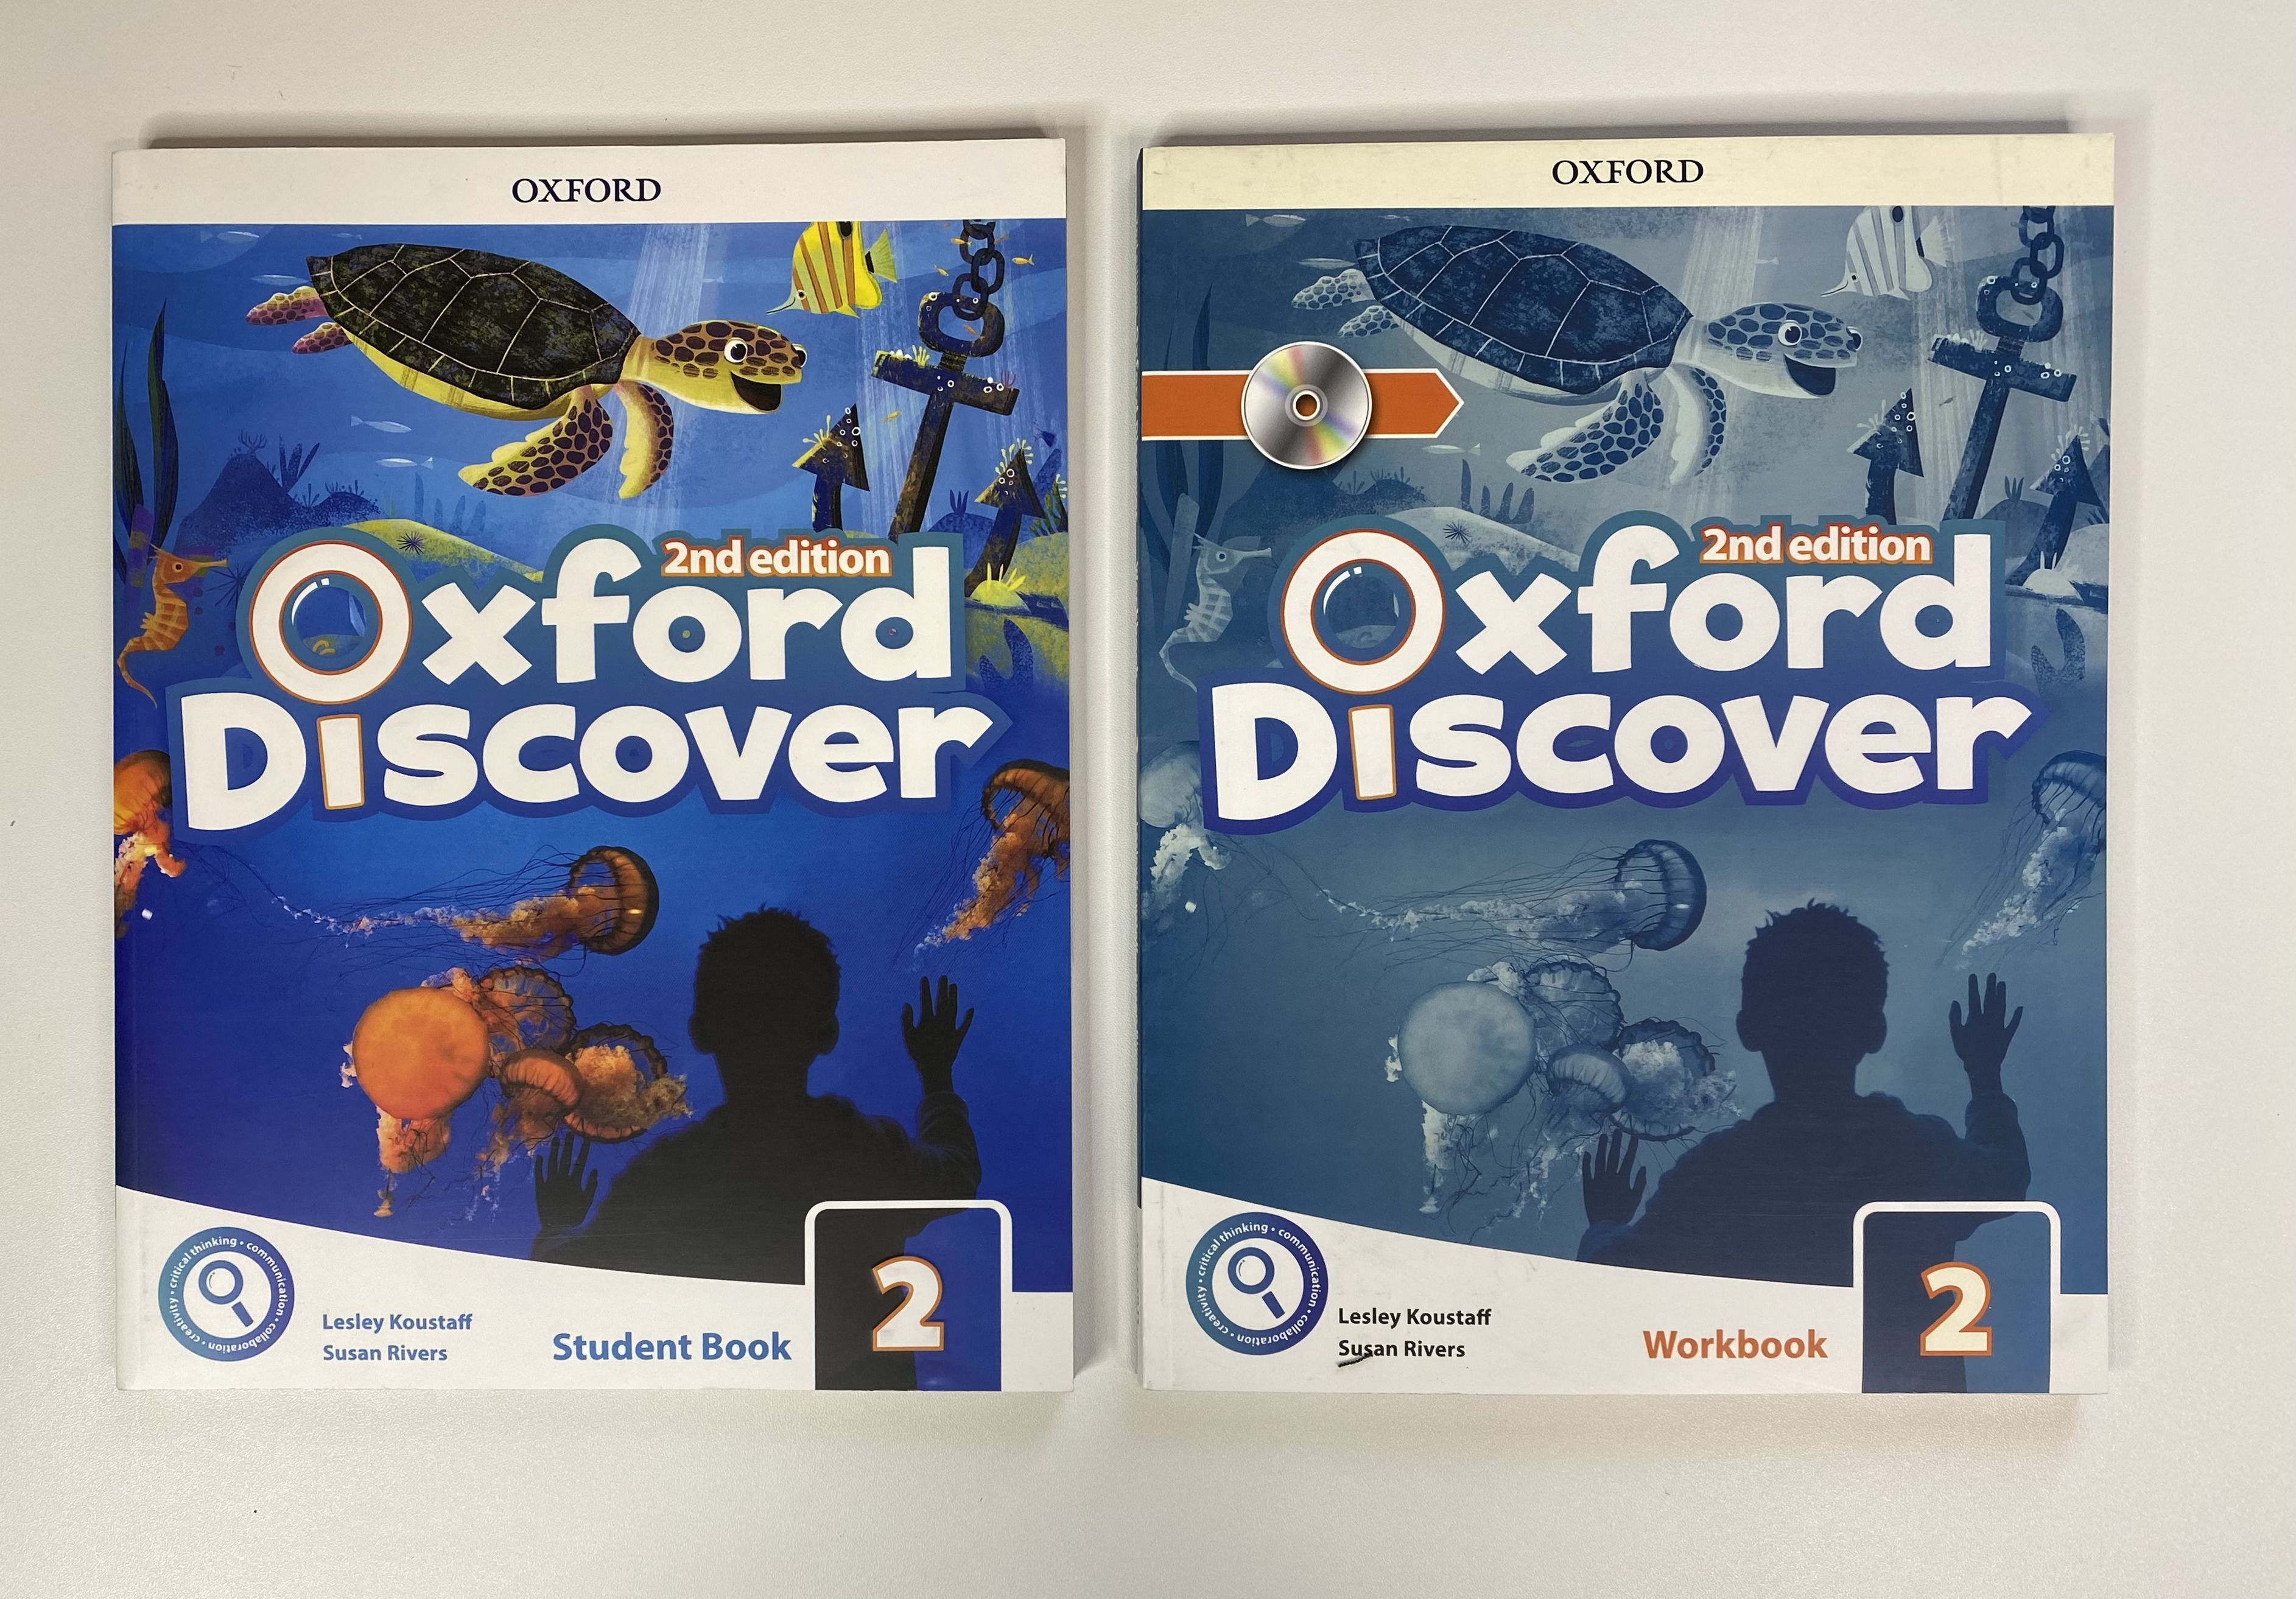 Oxford discover 2nd Edition. Oxford discover 3 2nd Edition. Учебник Oxford discover. Oxford discover 2nd Edition Listening 1 27. Oxford discover book